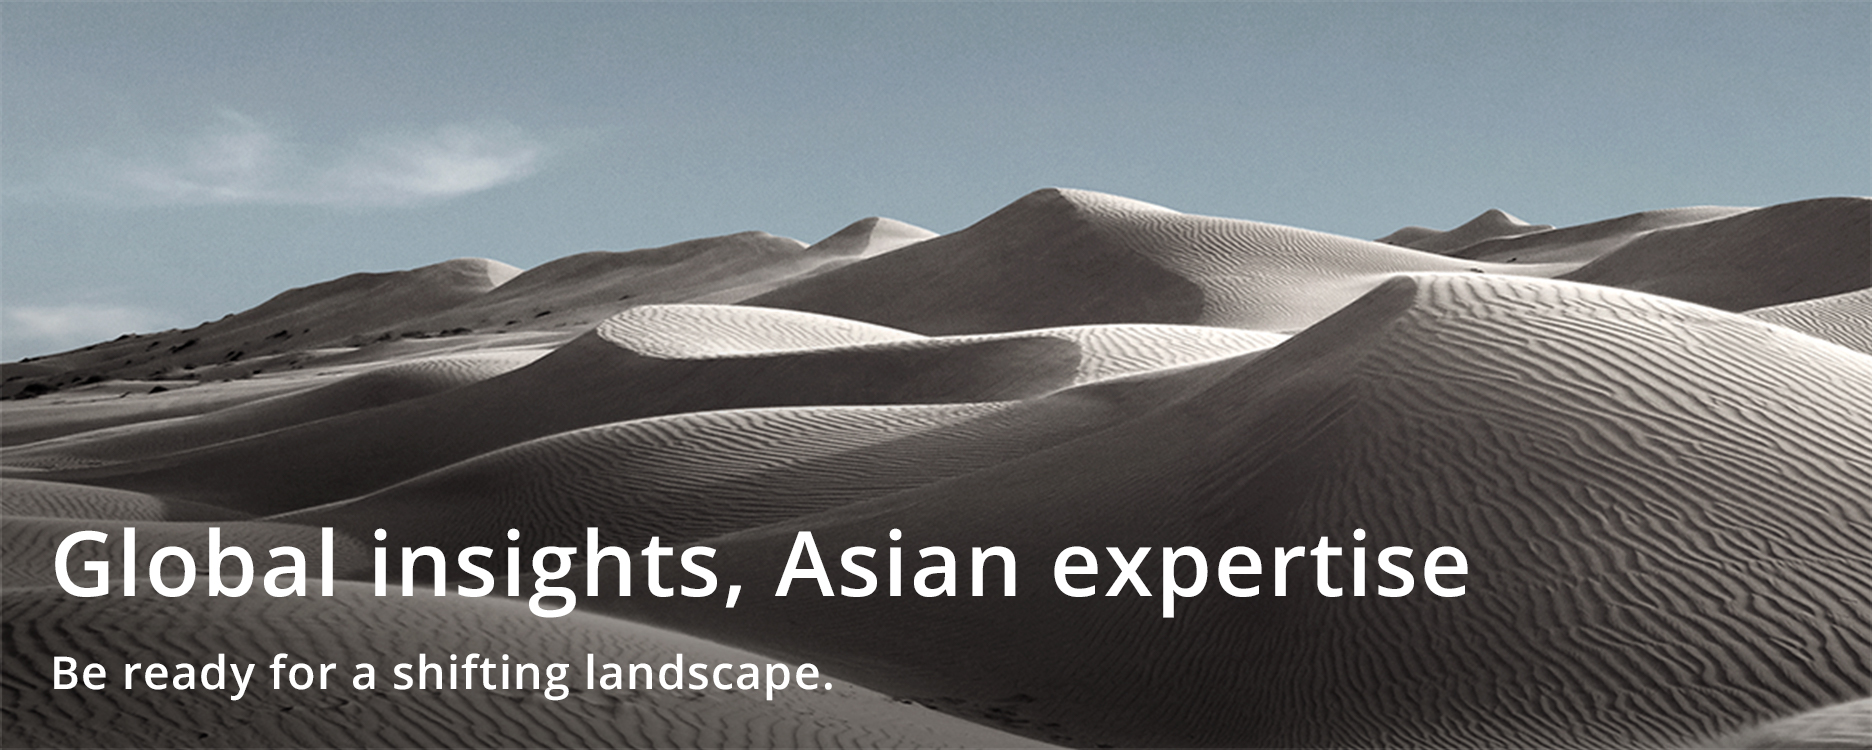 Global insights, Asian expertise